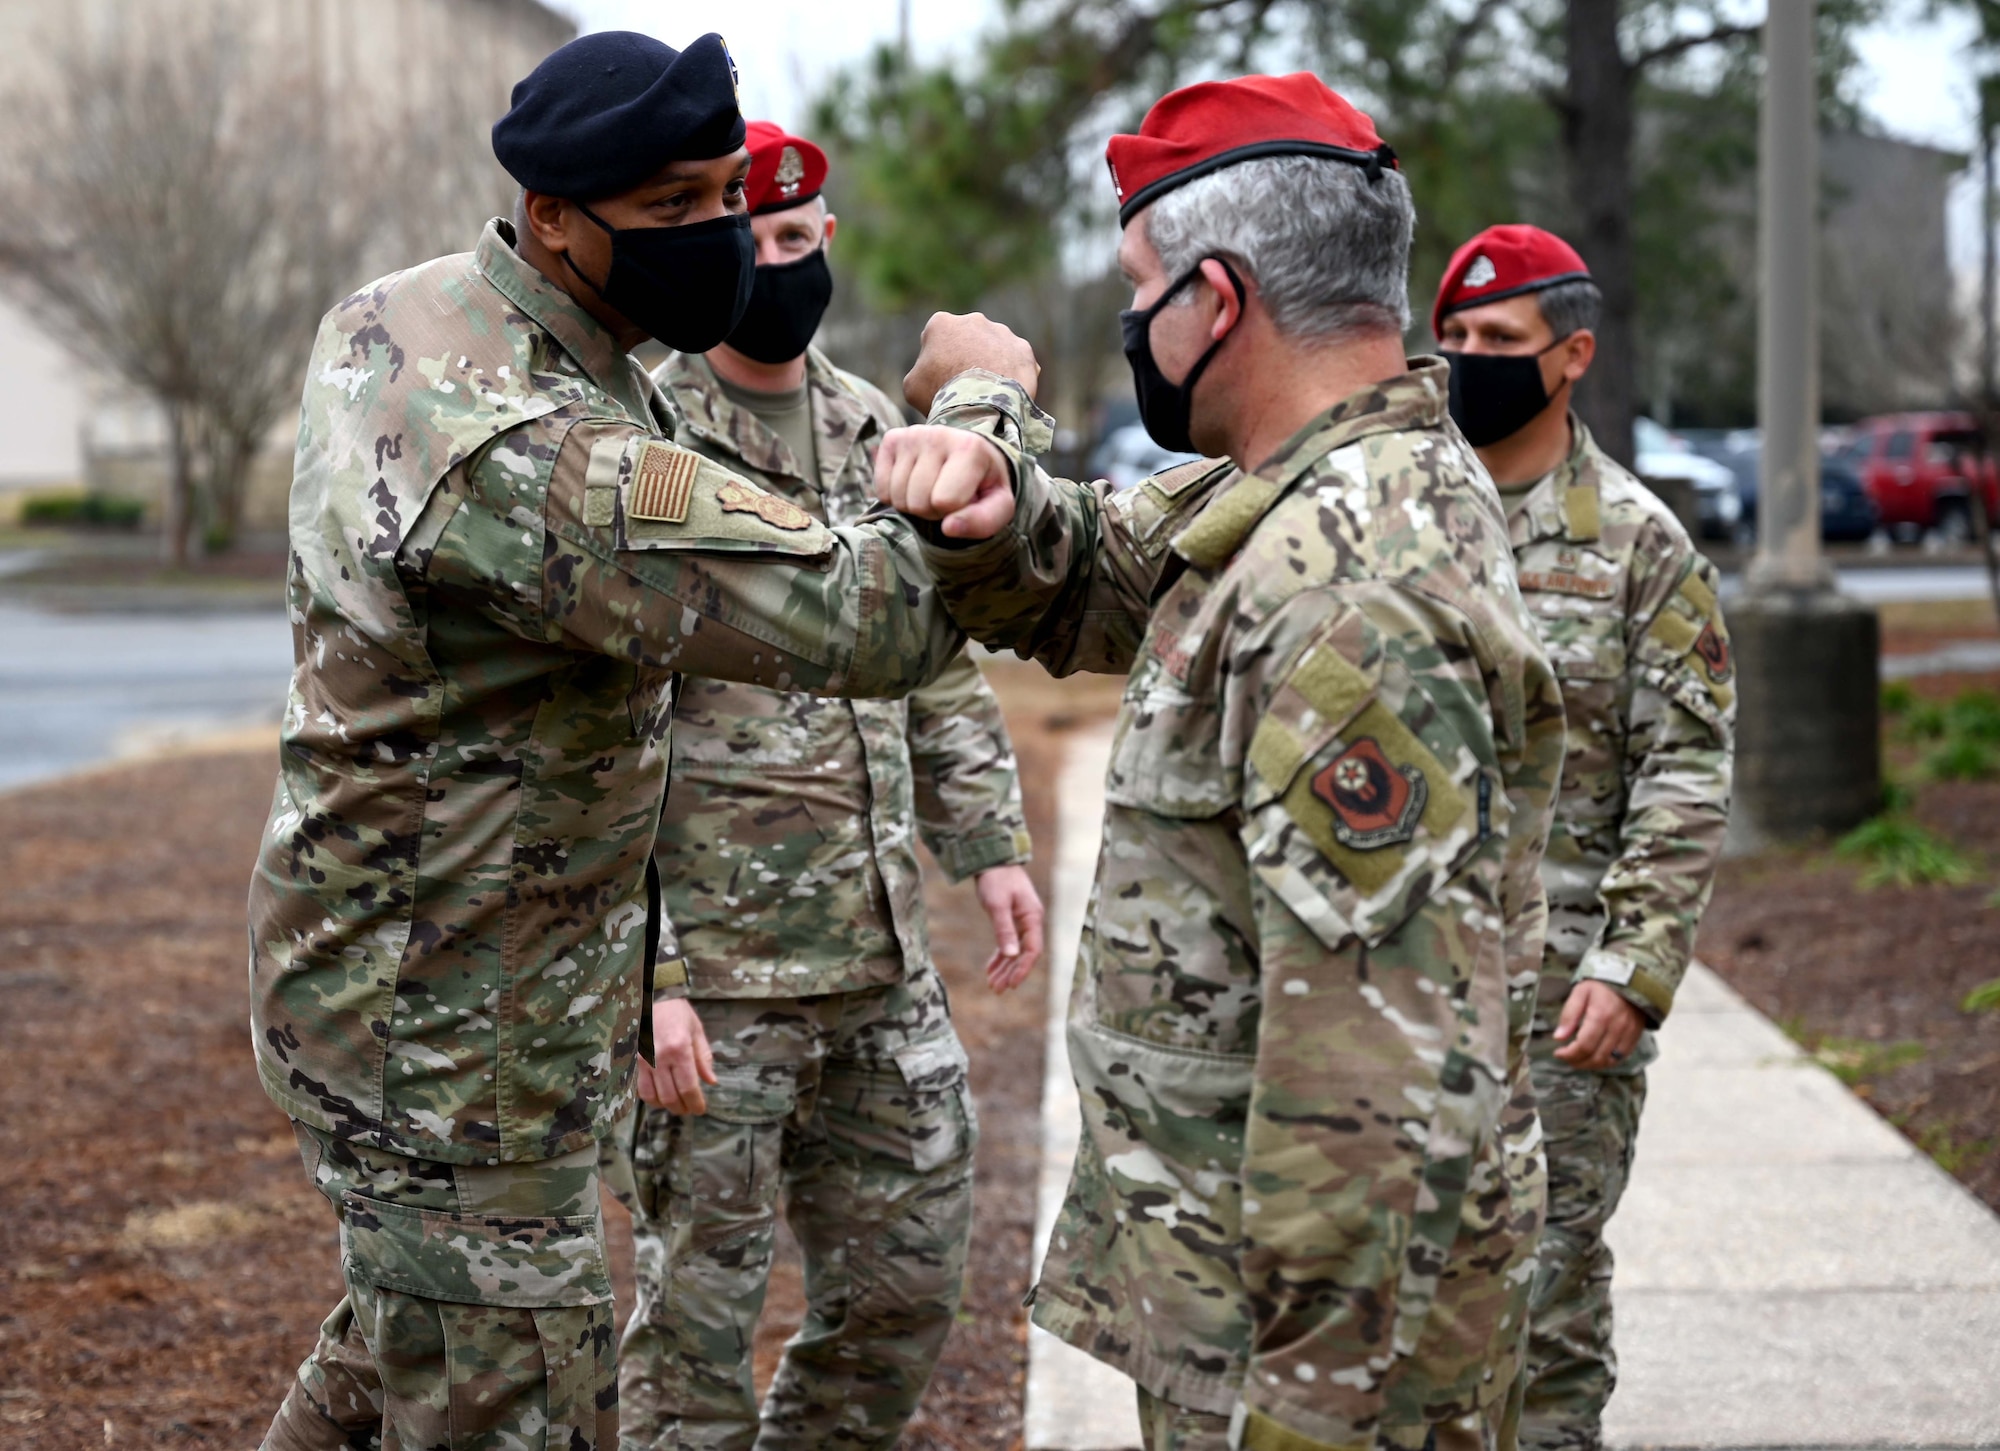 Brigadier General Roy Collins, director of Security Forces, deputy chief of staff for Logistics, Engineering and Force Protection, is greeted by the 23rd Special Tactics Squadron leadership during a visit to Hurlburt Field, Fla., Jan. 11, 2021. During the tour, Collins and Chief Master Sgt. Brian Lewis, Security Forces career field manager, were briefed on the Deployed Aircraft Ground Response Element (DAGRE) training process, took part in a lasershot demonstration, and visited the 23rd STS compound for a mission briefing and a walk around the unit’s multilevel training and fitness facilities. (U.S. Air Force photo by Senior Airman Brandon Esau)